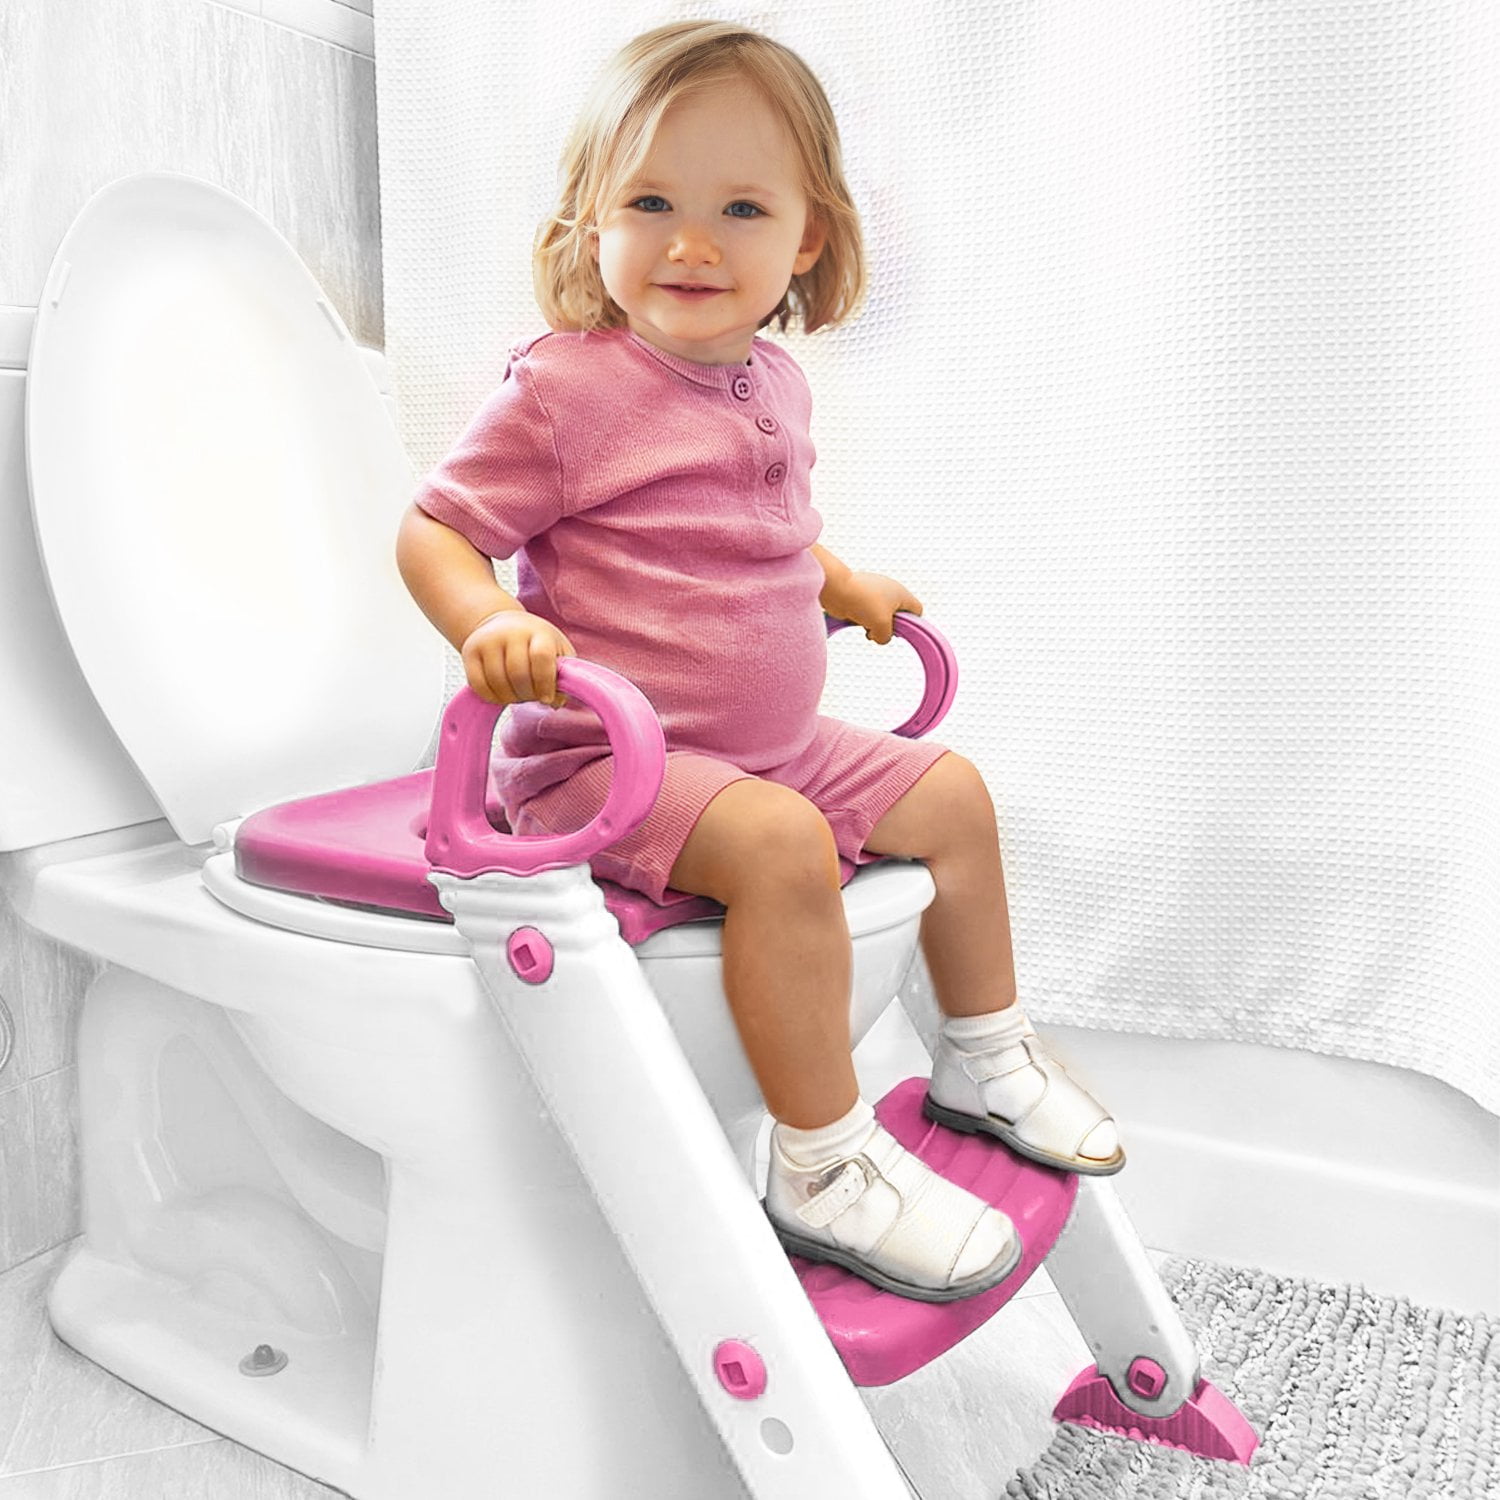 Potty Seat Toilet Seat with Step Stool for Kids Splash Guard and Anti-Slip Pad for Boys Girls Bbpark Toddler Potty Training Seat with Ladder 